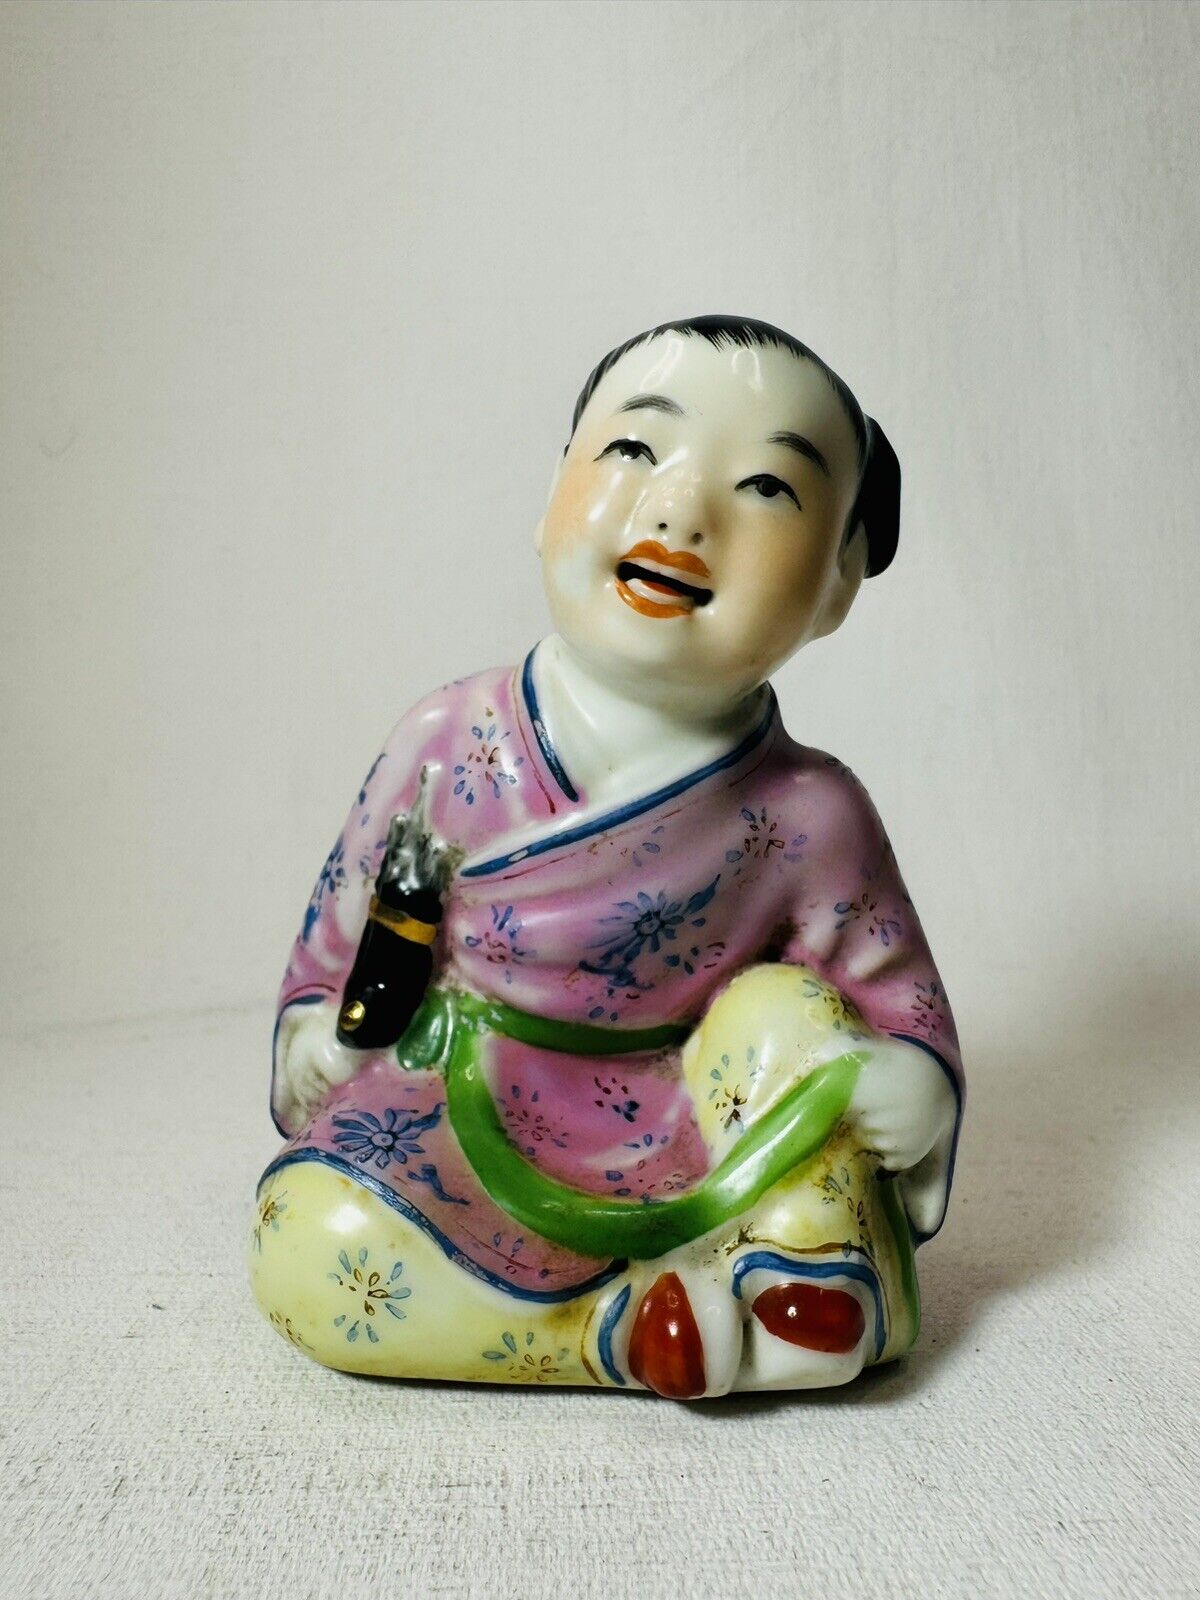 Vintage Chinese Child Figurine Porcelain Marked, Excellent Condition Exceptional